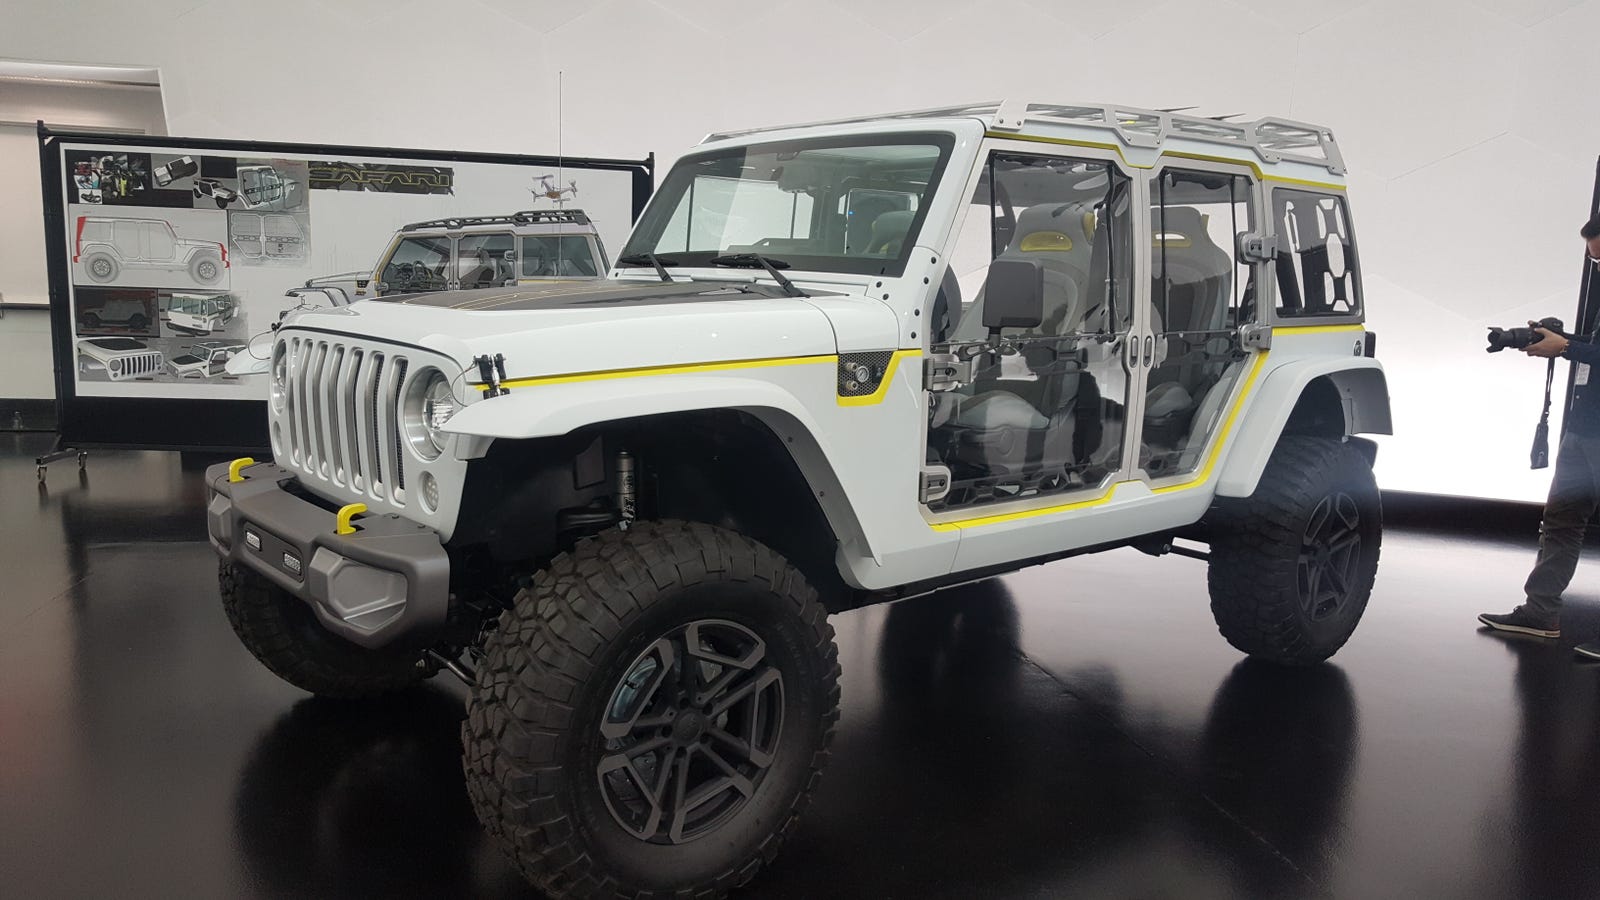 The Jeep Safari Concept May Give Up Secrets Of The New Wrangler